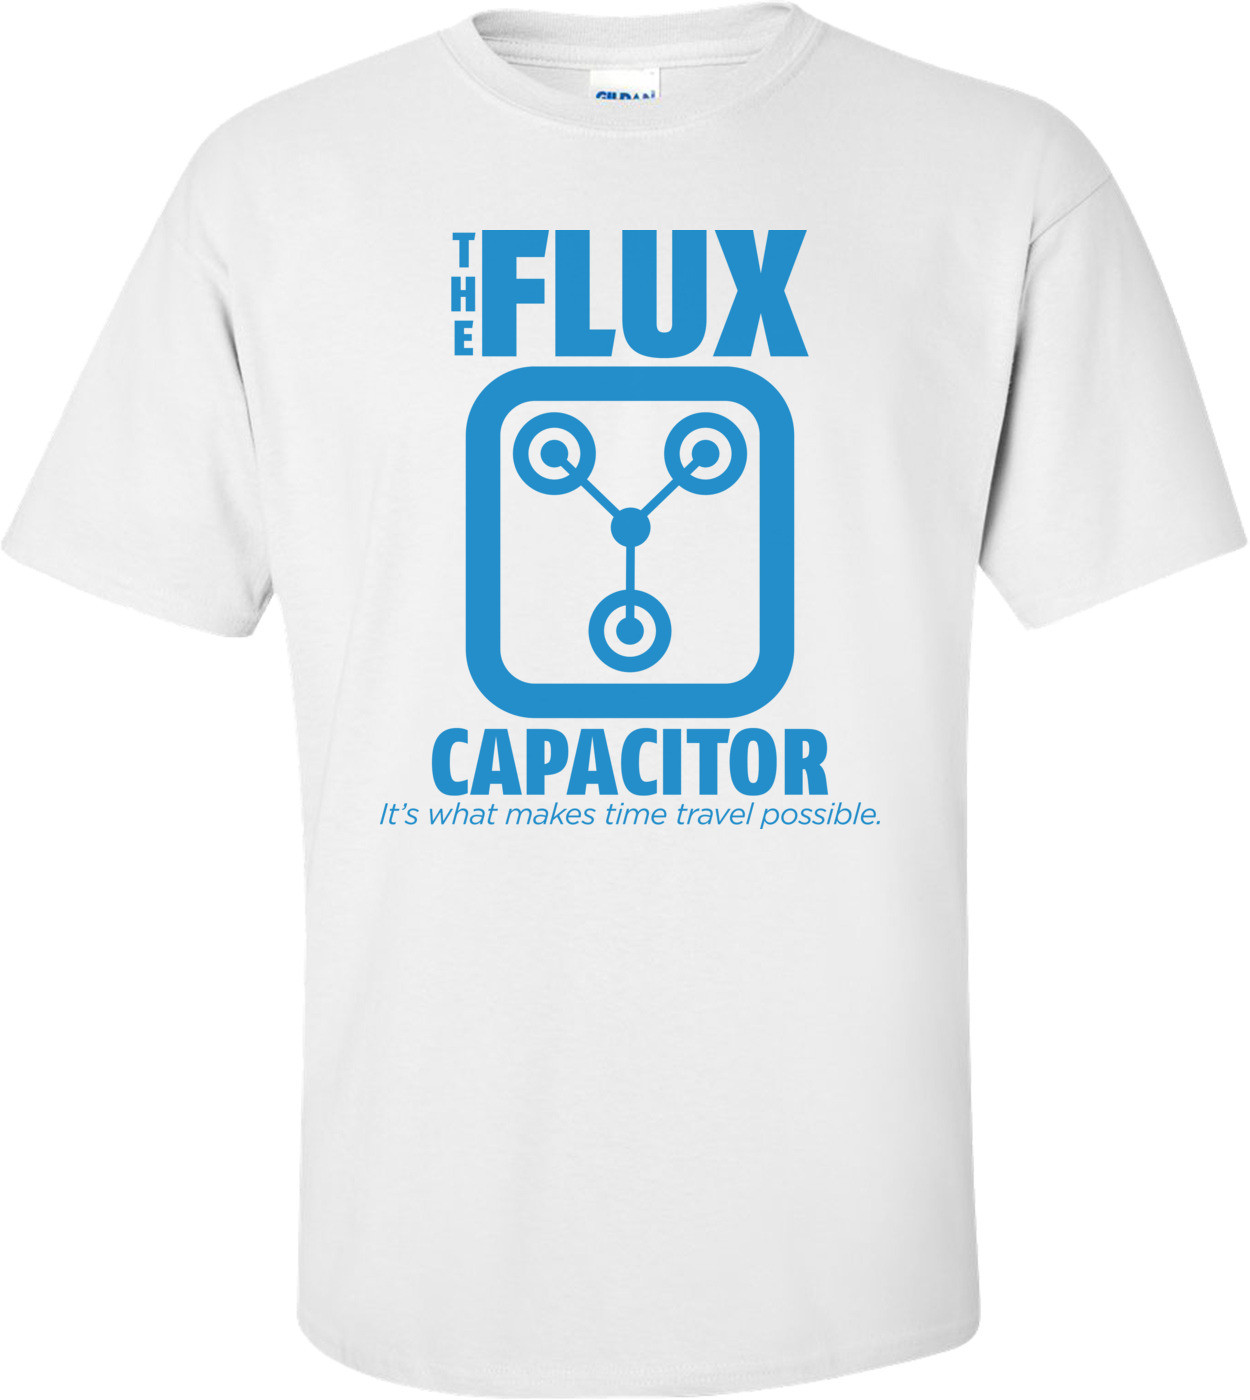 The Flux Capacitor Back To The Future T-shirt